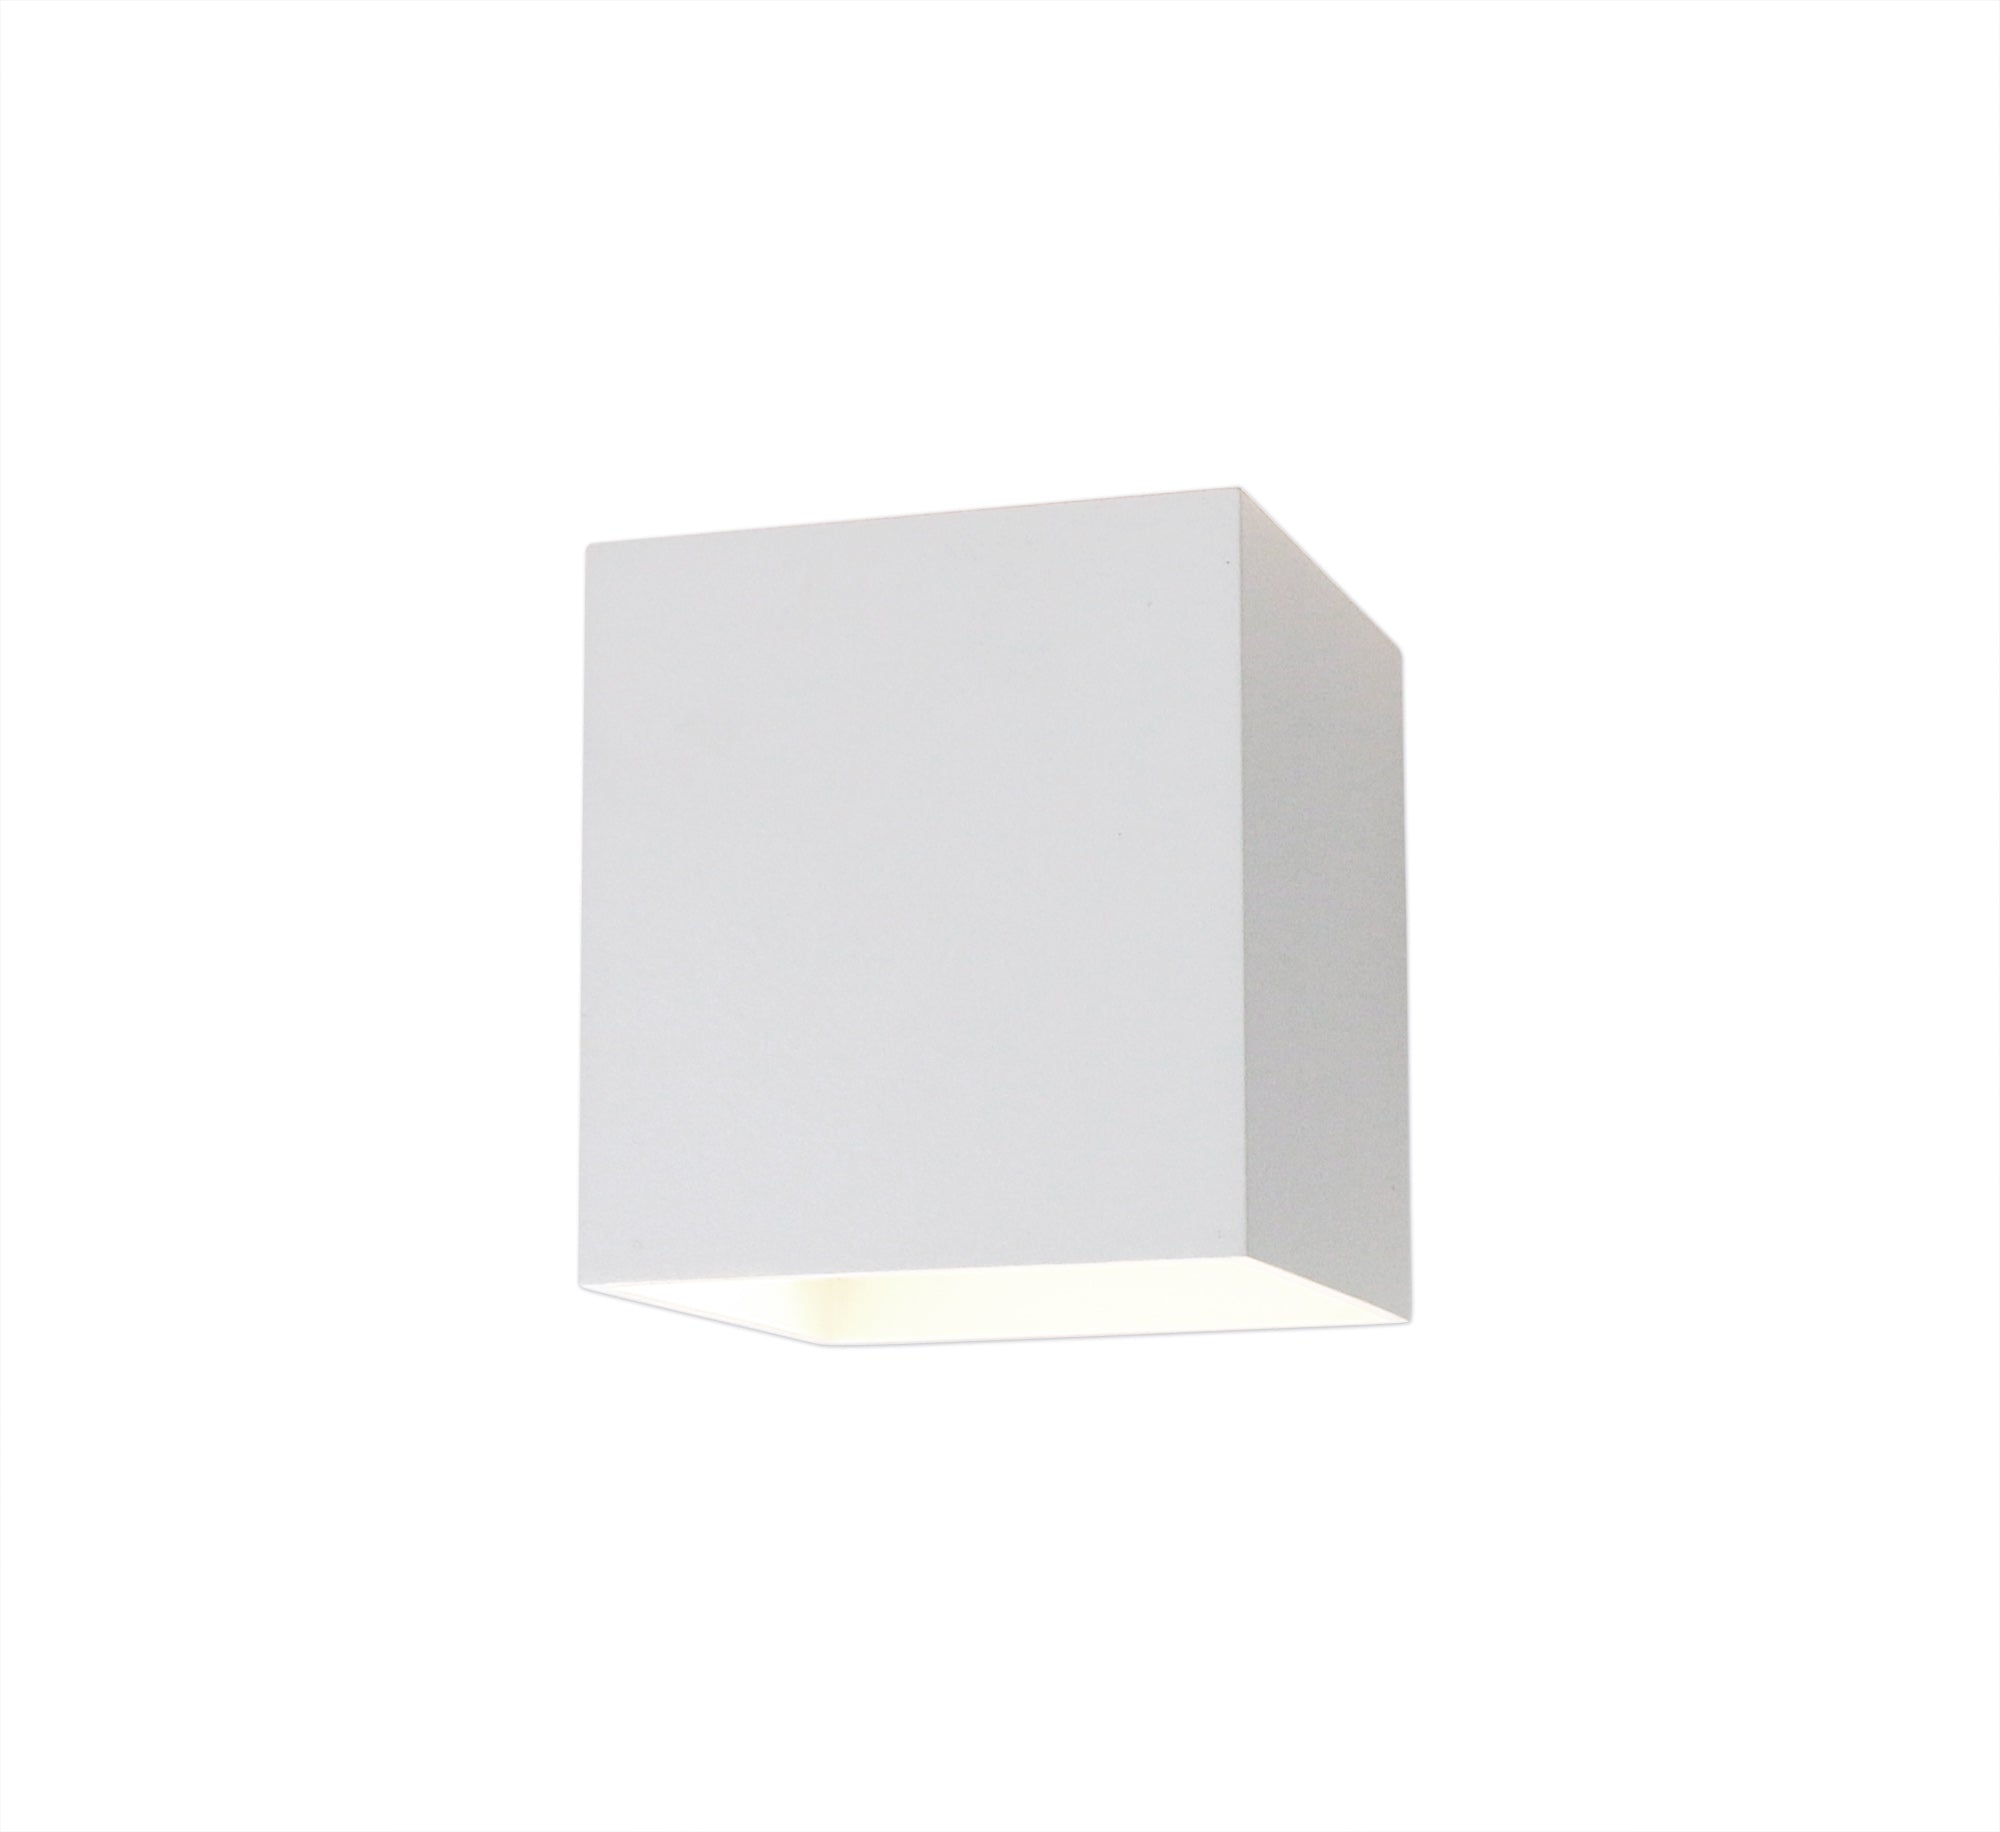 Up-and-down Delia Wall Lighting with 2x3W LED 3000K Sand White, 410 lumens, IP54, 3-year warranty